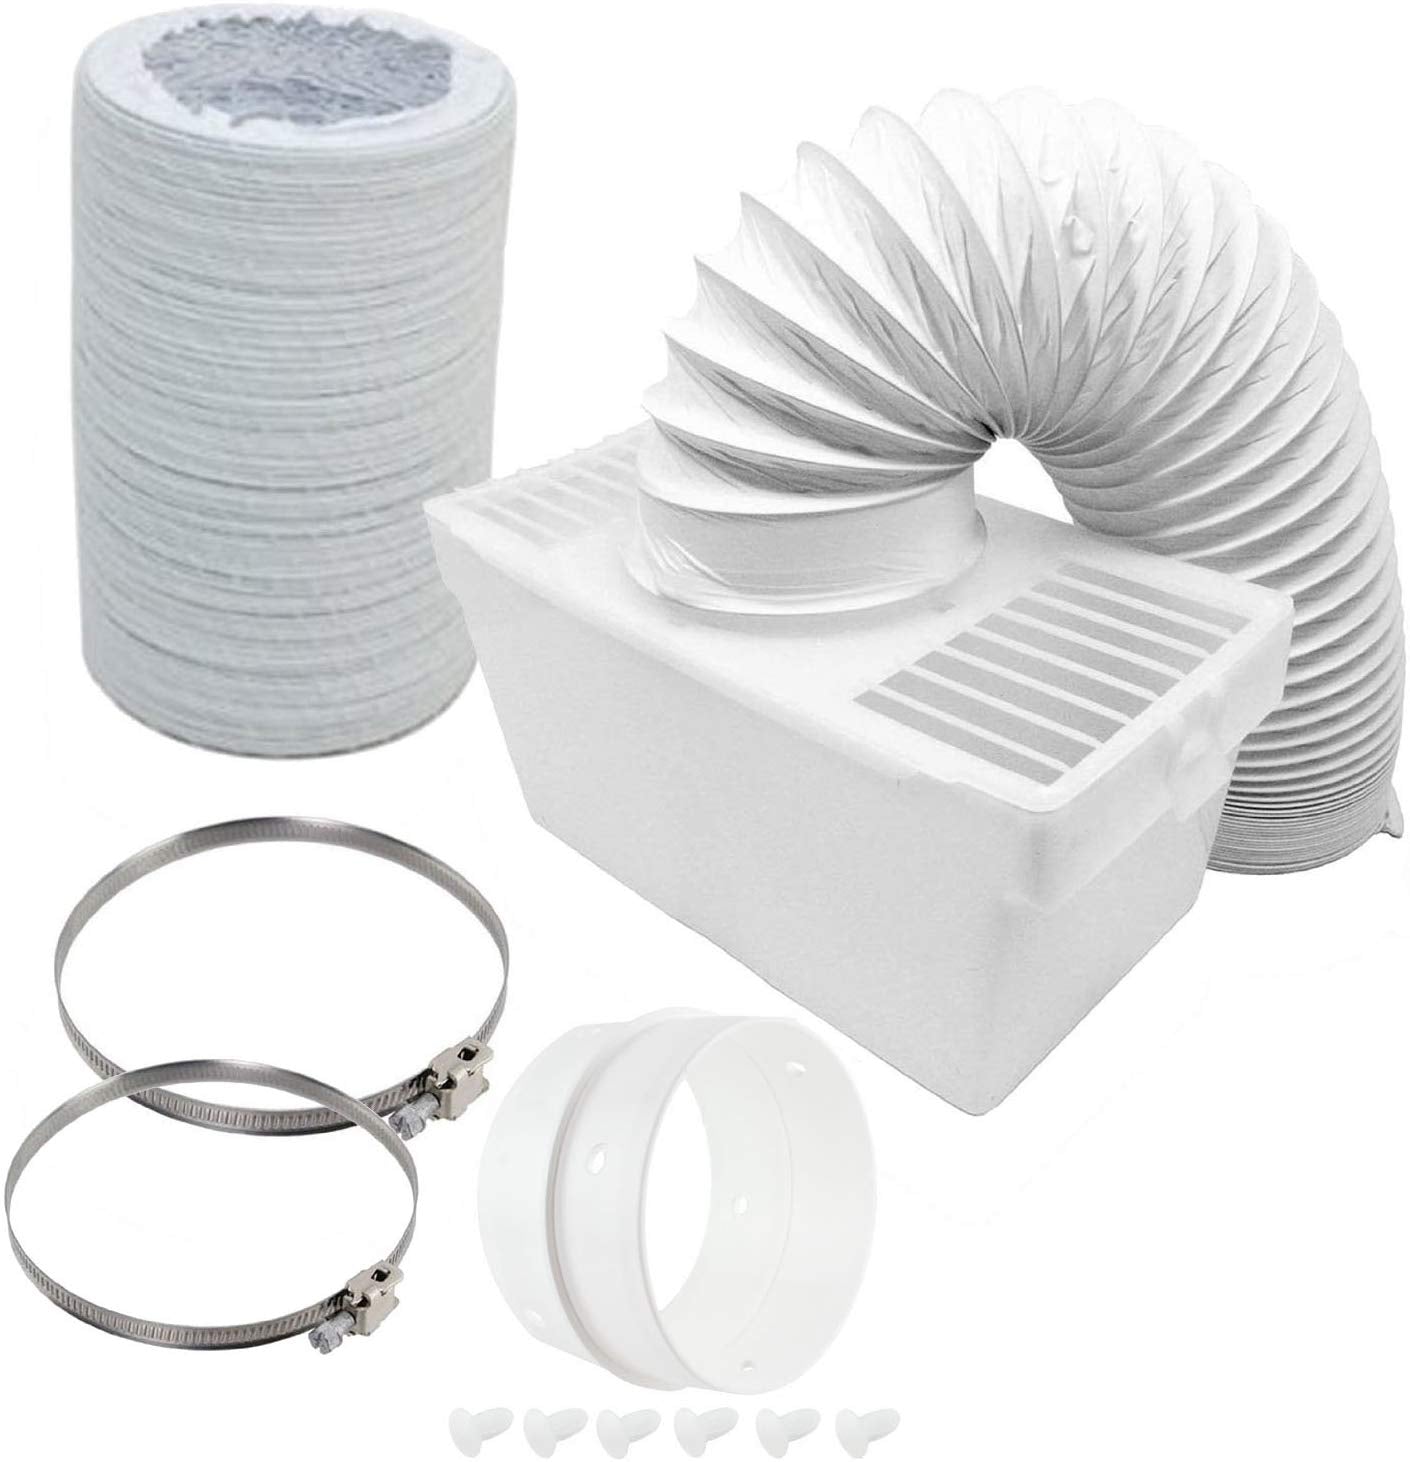 Condenser Box & Extra Long Hose Kit With Connection Ring for Hoover Tumble Dryer (4" / 100mm Diameter / 6M Hose)